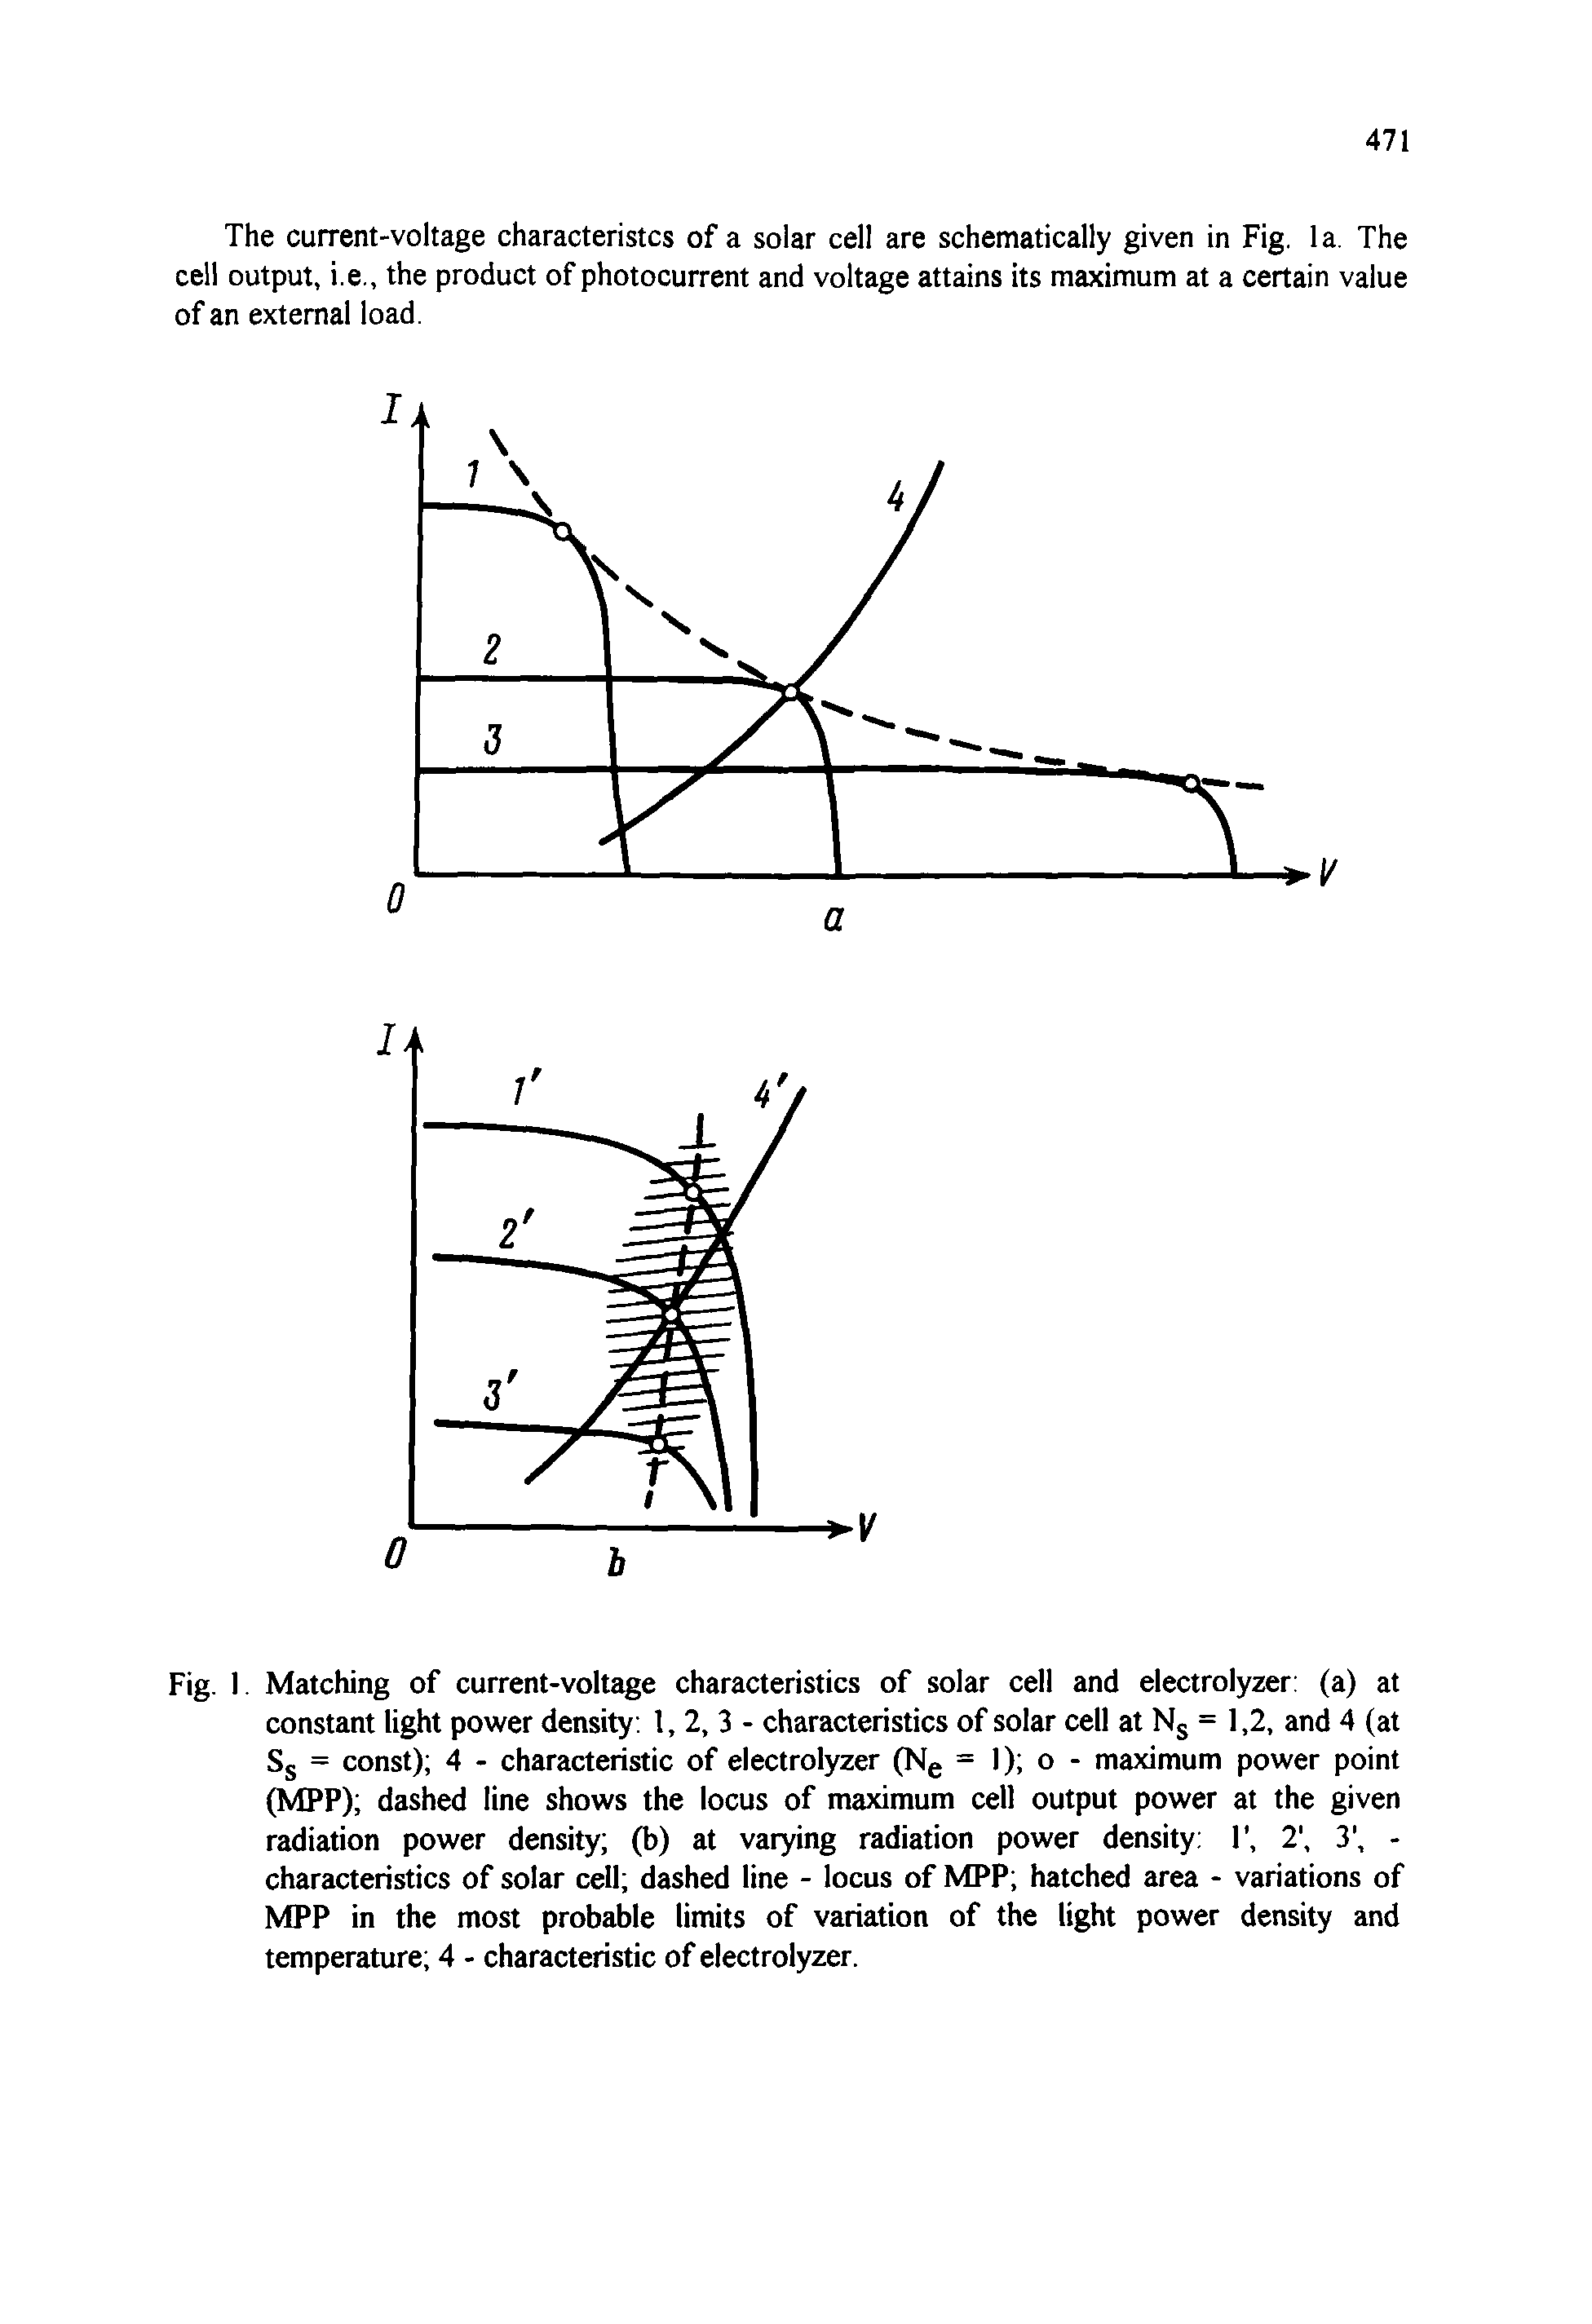 Fig. 1 Matching of current-voltage characteristics of solar cell and electrolyzer (a) at constant light power density 1, 2, 3 - characteristics of solar cell at Ng = 1,2, and 4 (at Sj = const) 4 - characteristic of electrolyzer (Ng = 1) o - maximum power point (MPP) dashed line shows the locus of maximum cell output power at the given radiation power density (b) at varying radiation power density 1 , 2, 3, -characteristics of solar cell dashed line - locus of MPP hatched area - variations of MPP in the most probable limits of variation of the light power density and temperature 4 - characteristic of electrolyzer.